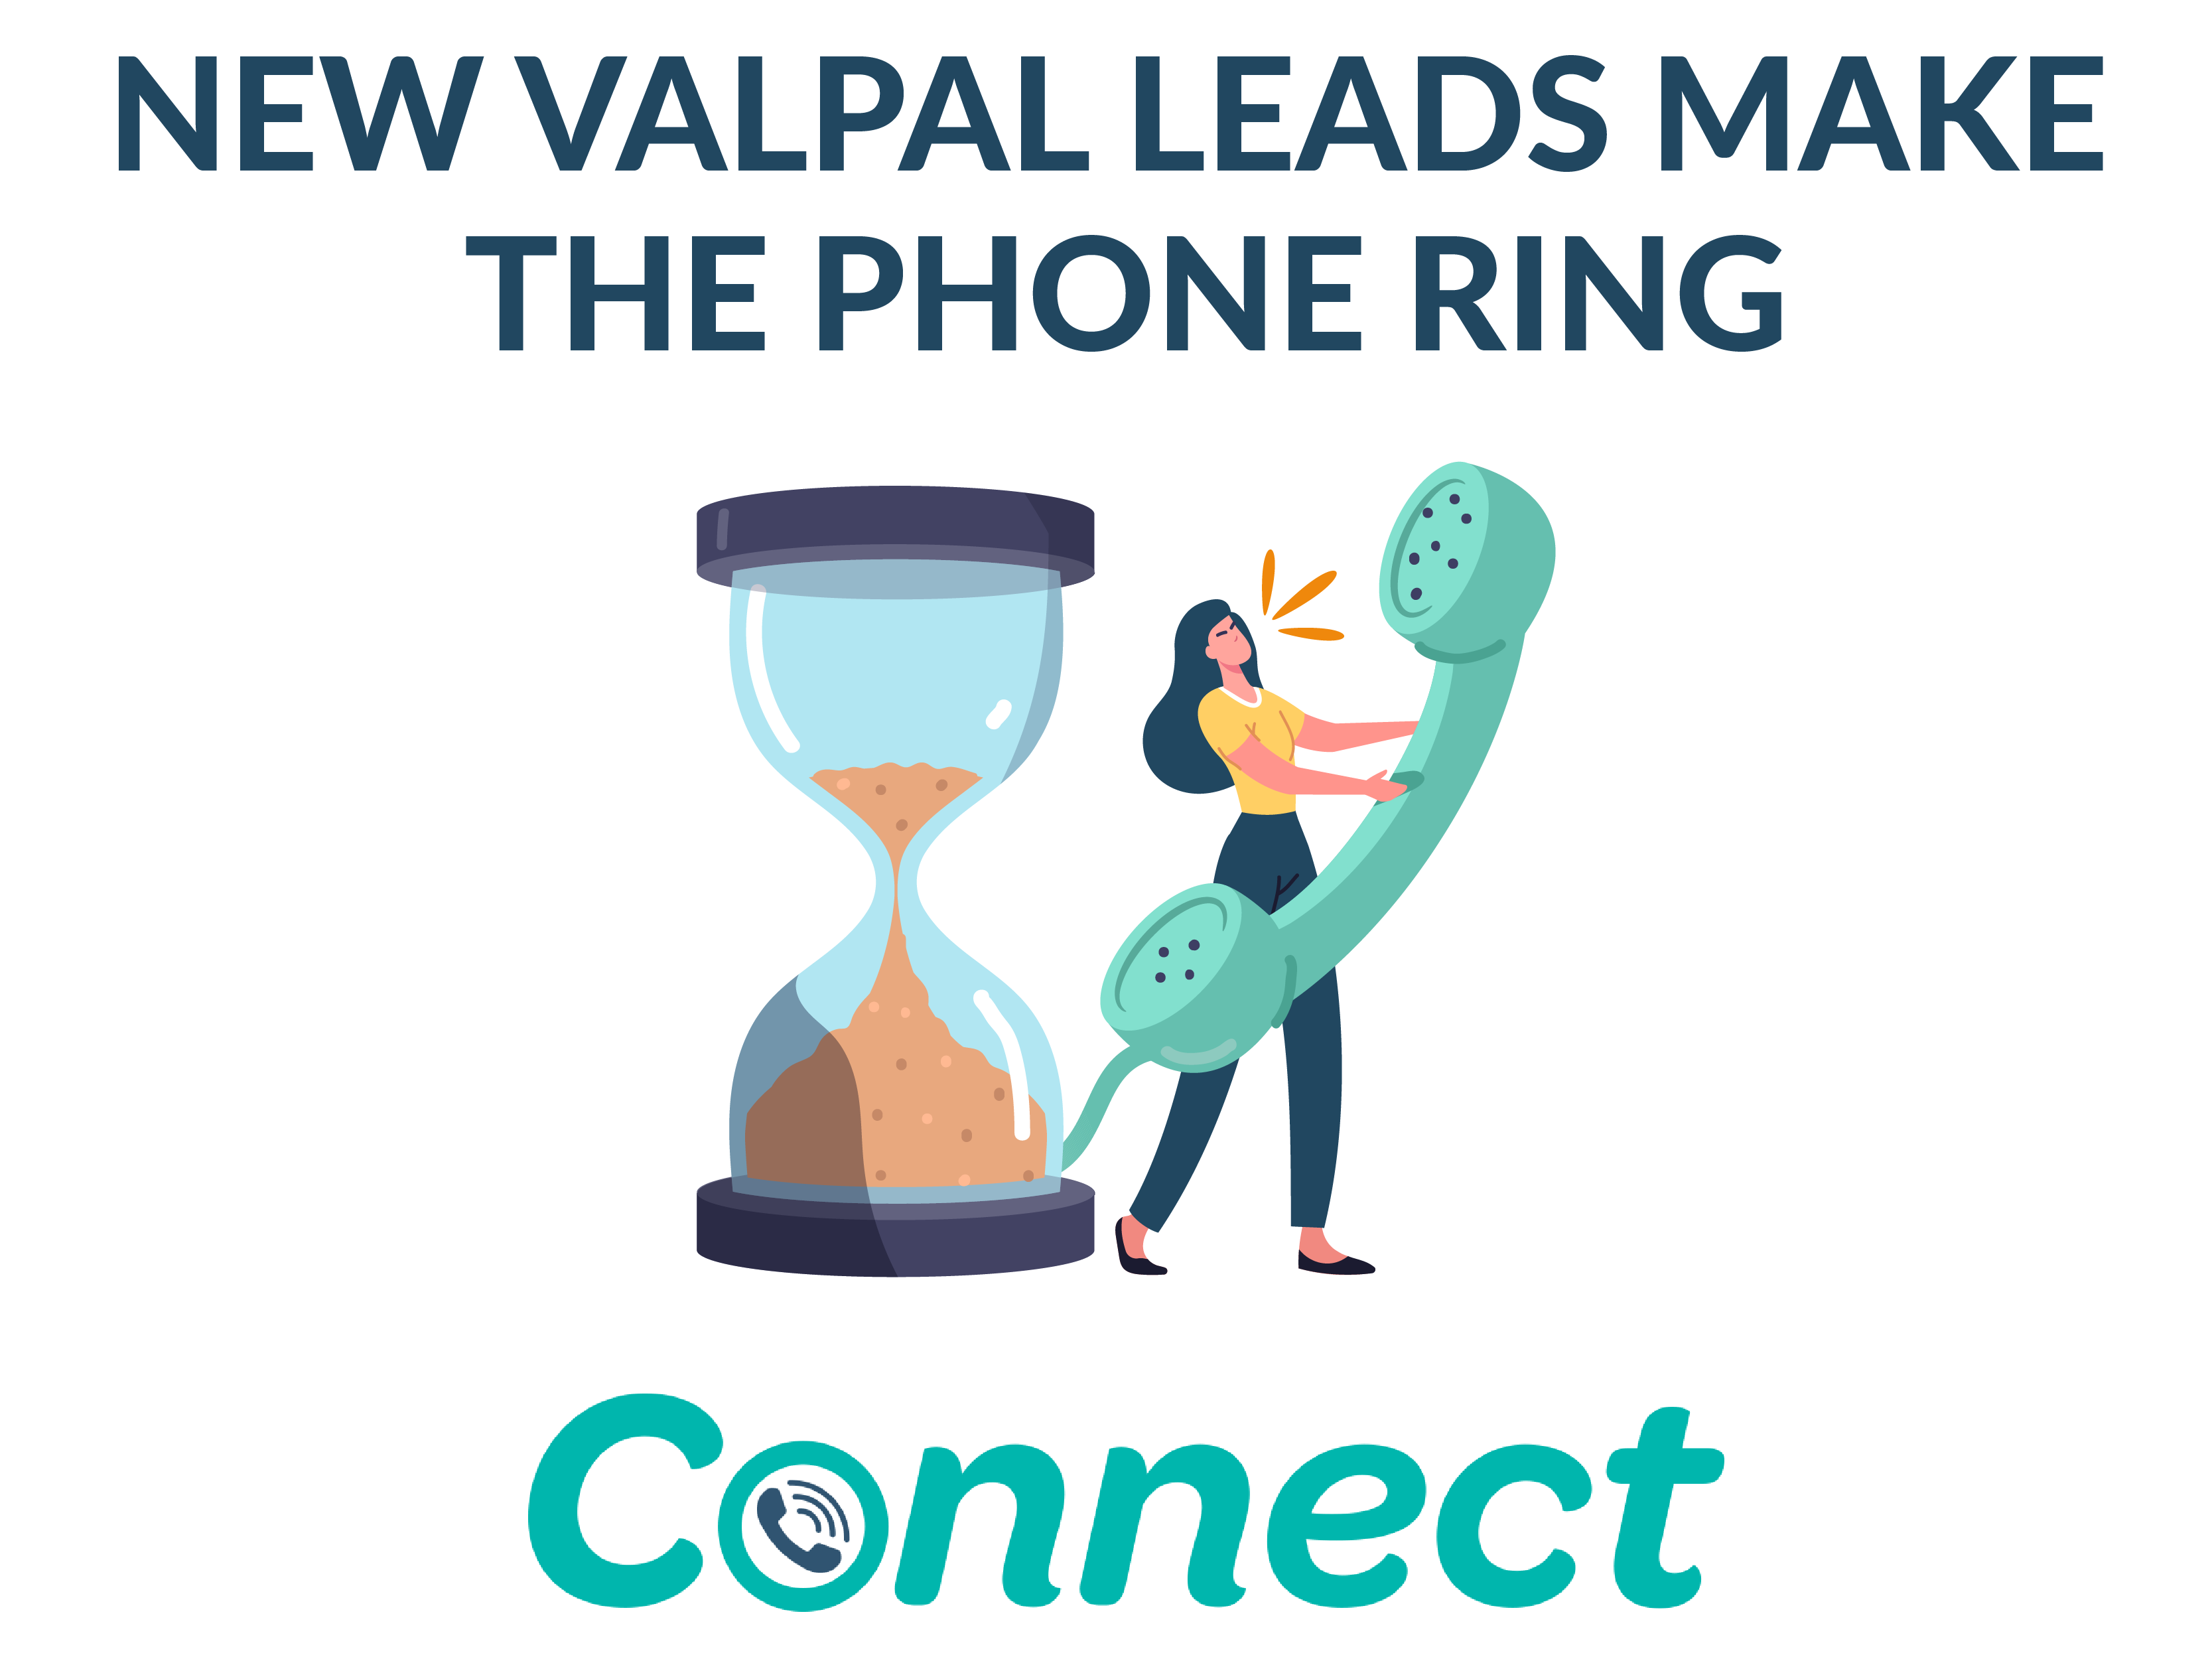 Introducing Connect – the new ValPal feature that will make your phone ring.